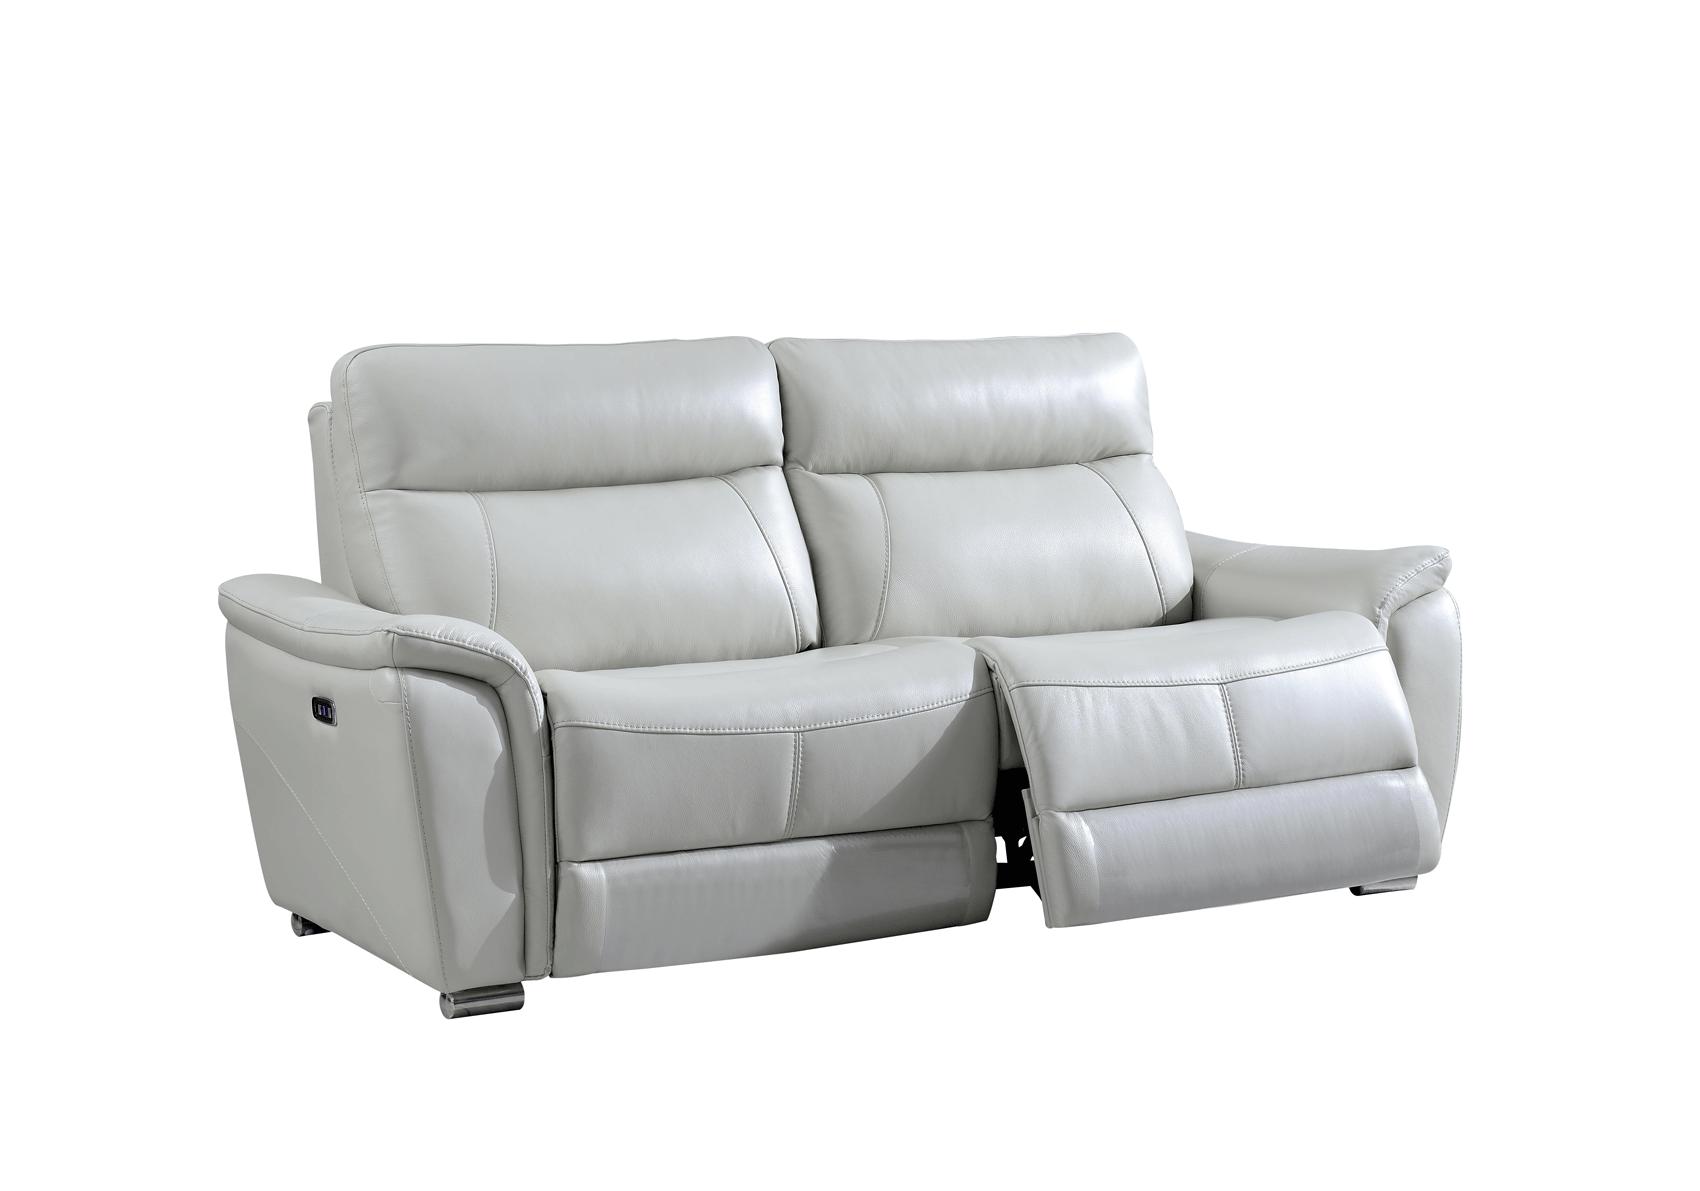 Contemporary, Modern Reclining Sofa 1705 ESF-1705-Sofa in Light Gray Top-grain Leather